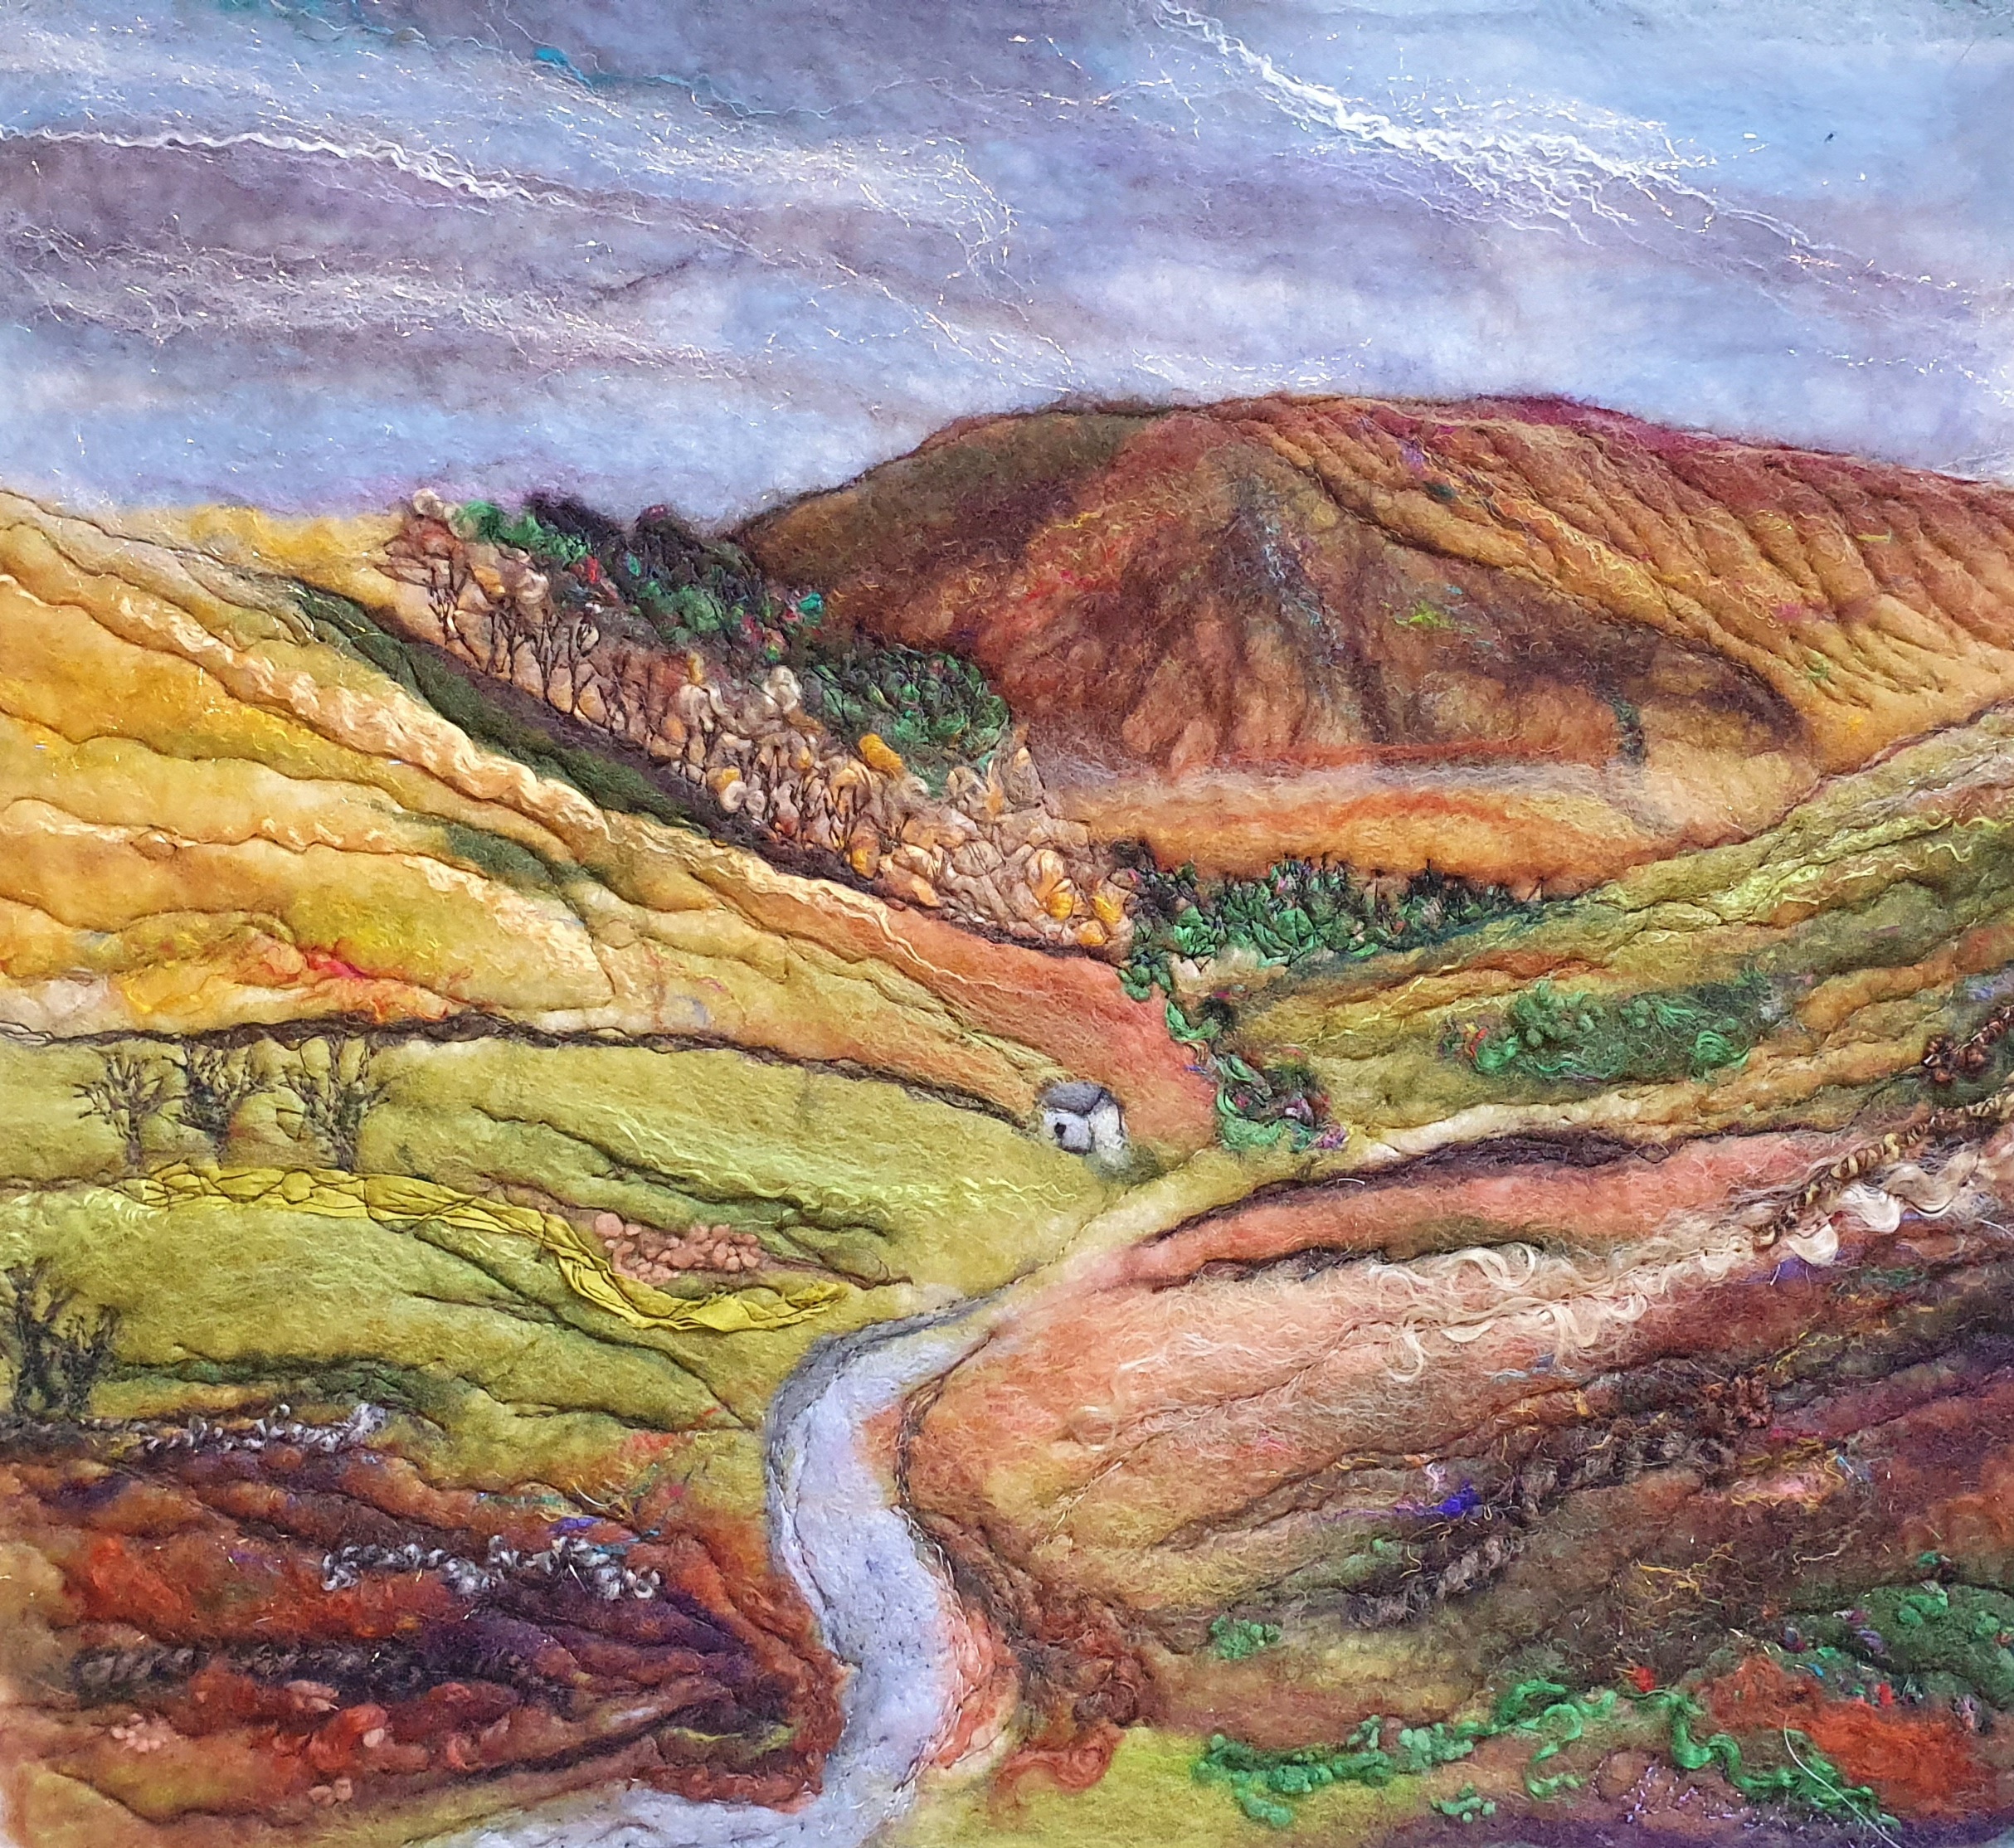  Trough of Bowland by Claire Priestly